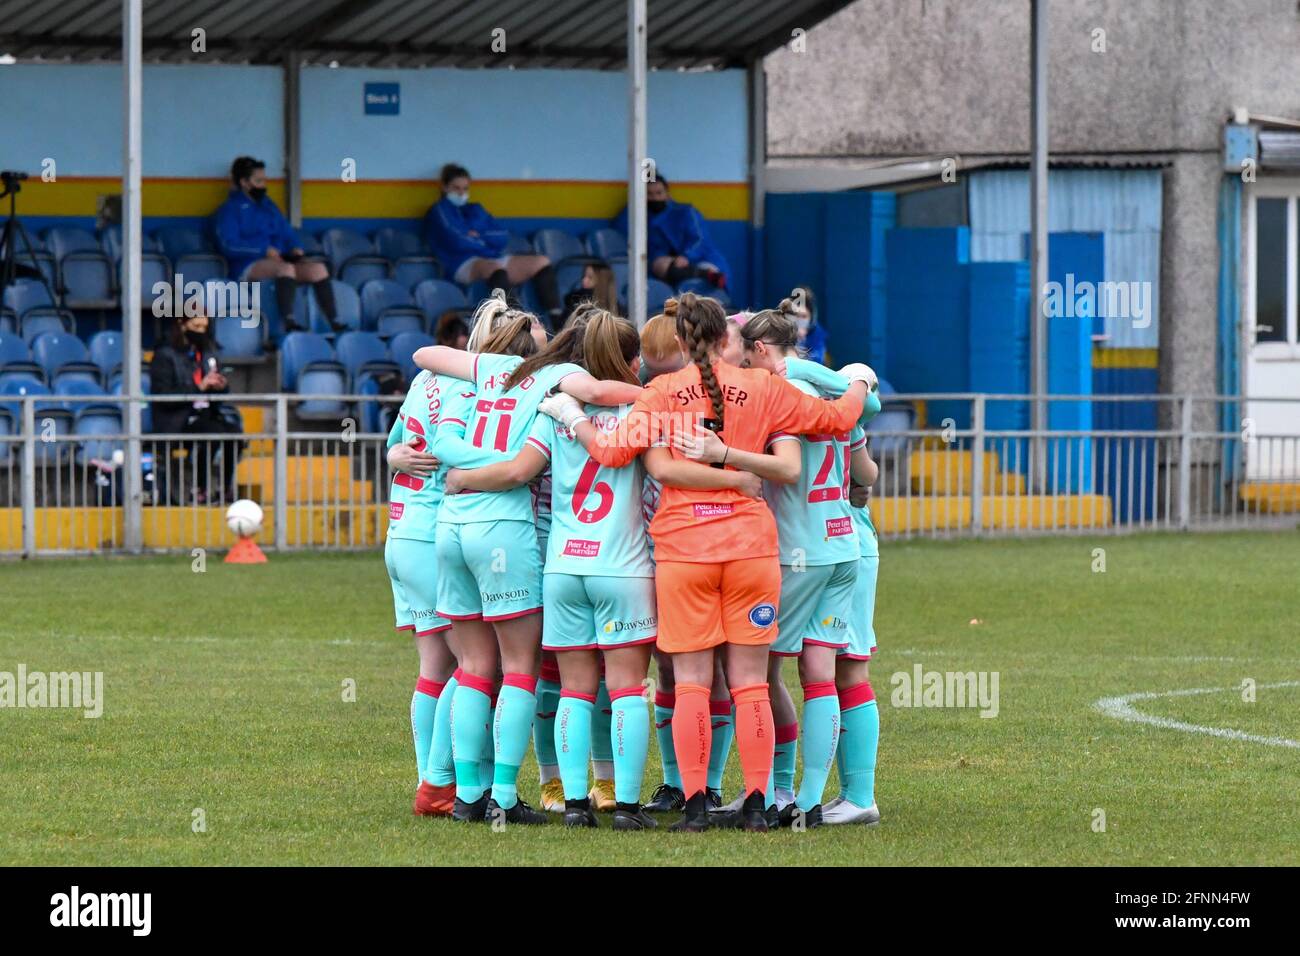 Port Talbot, Wales. 11 April, 2021. Swansea City Ladies team huddle prior to kick-off in the Orchard Welsh Premier Women's League match between Port Talbot Town Ladies and Swansea City Ladies at the Victoria Road Stadium in Port Talbot, Wales, UK on 11, April 2021. Credit: Duncan Thomas/Majestic Media. Stock Photo